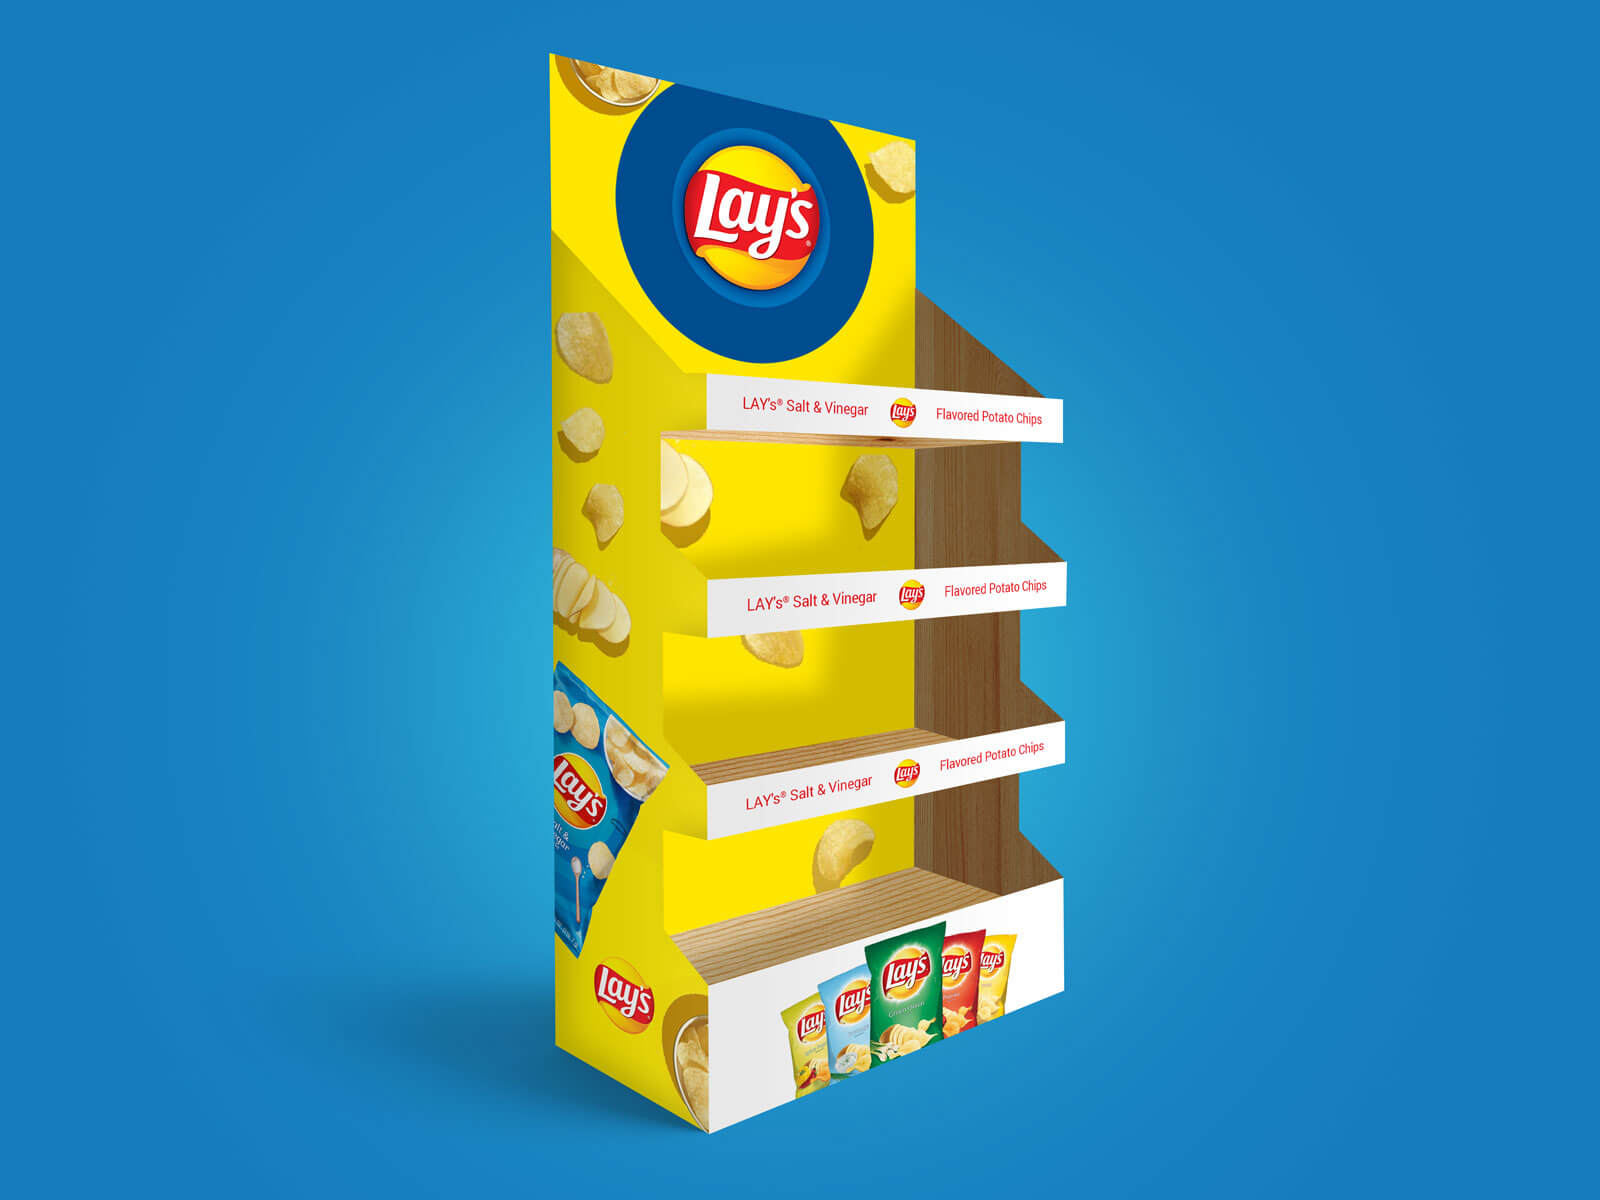 Free In-Store Product Display Rack Stand Mockup PSD